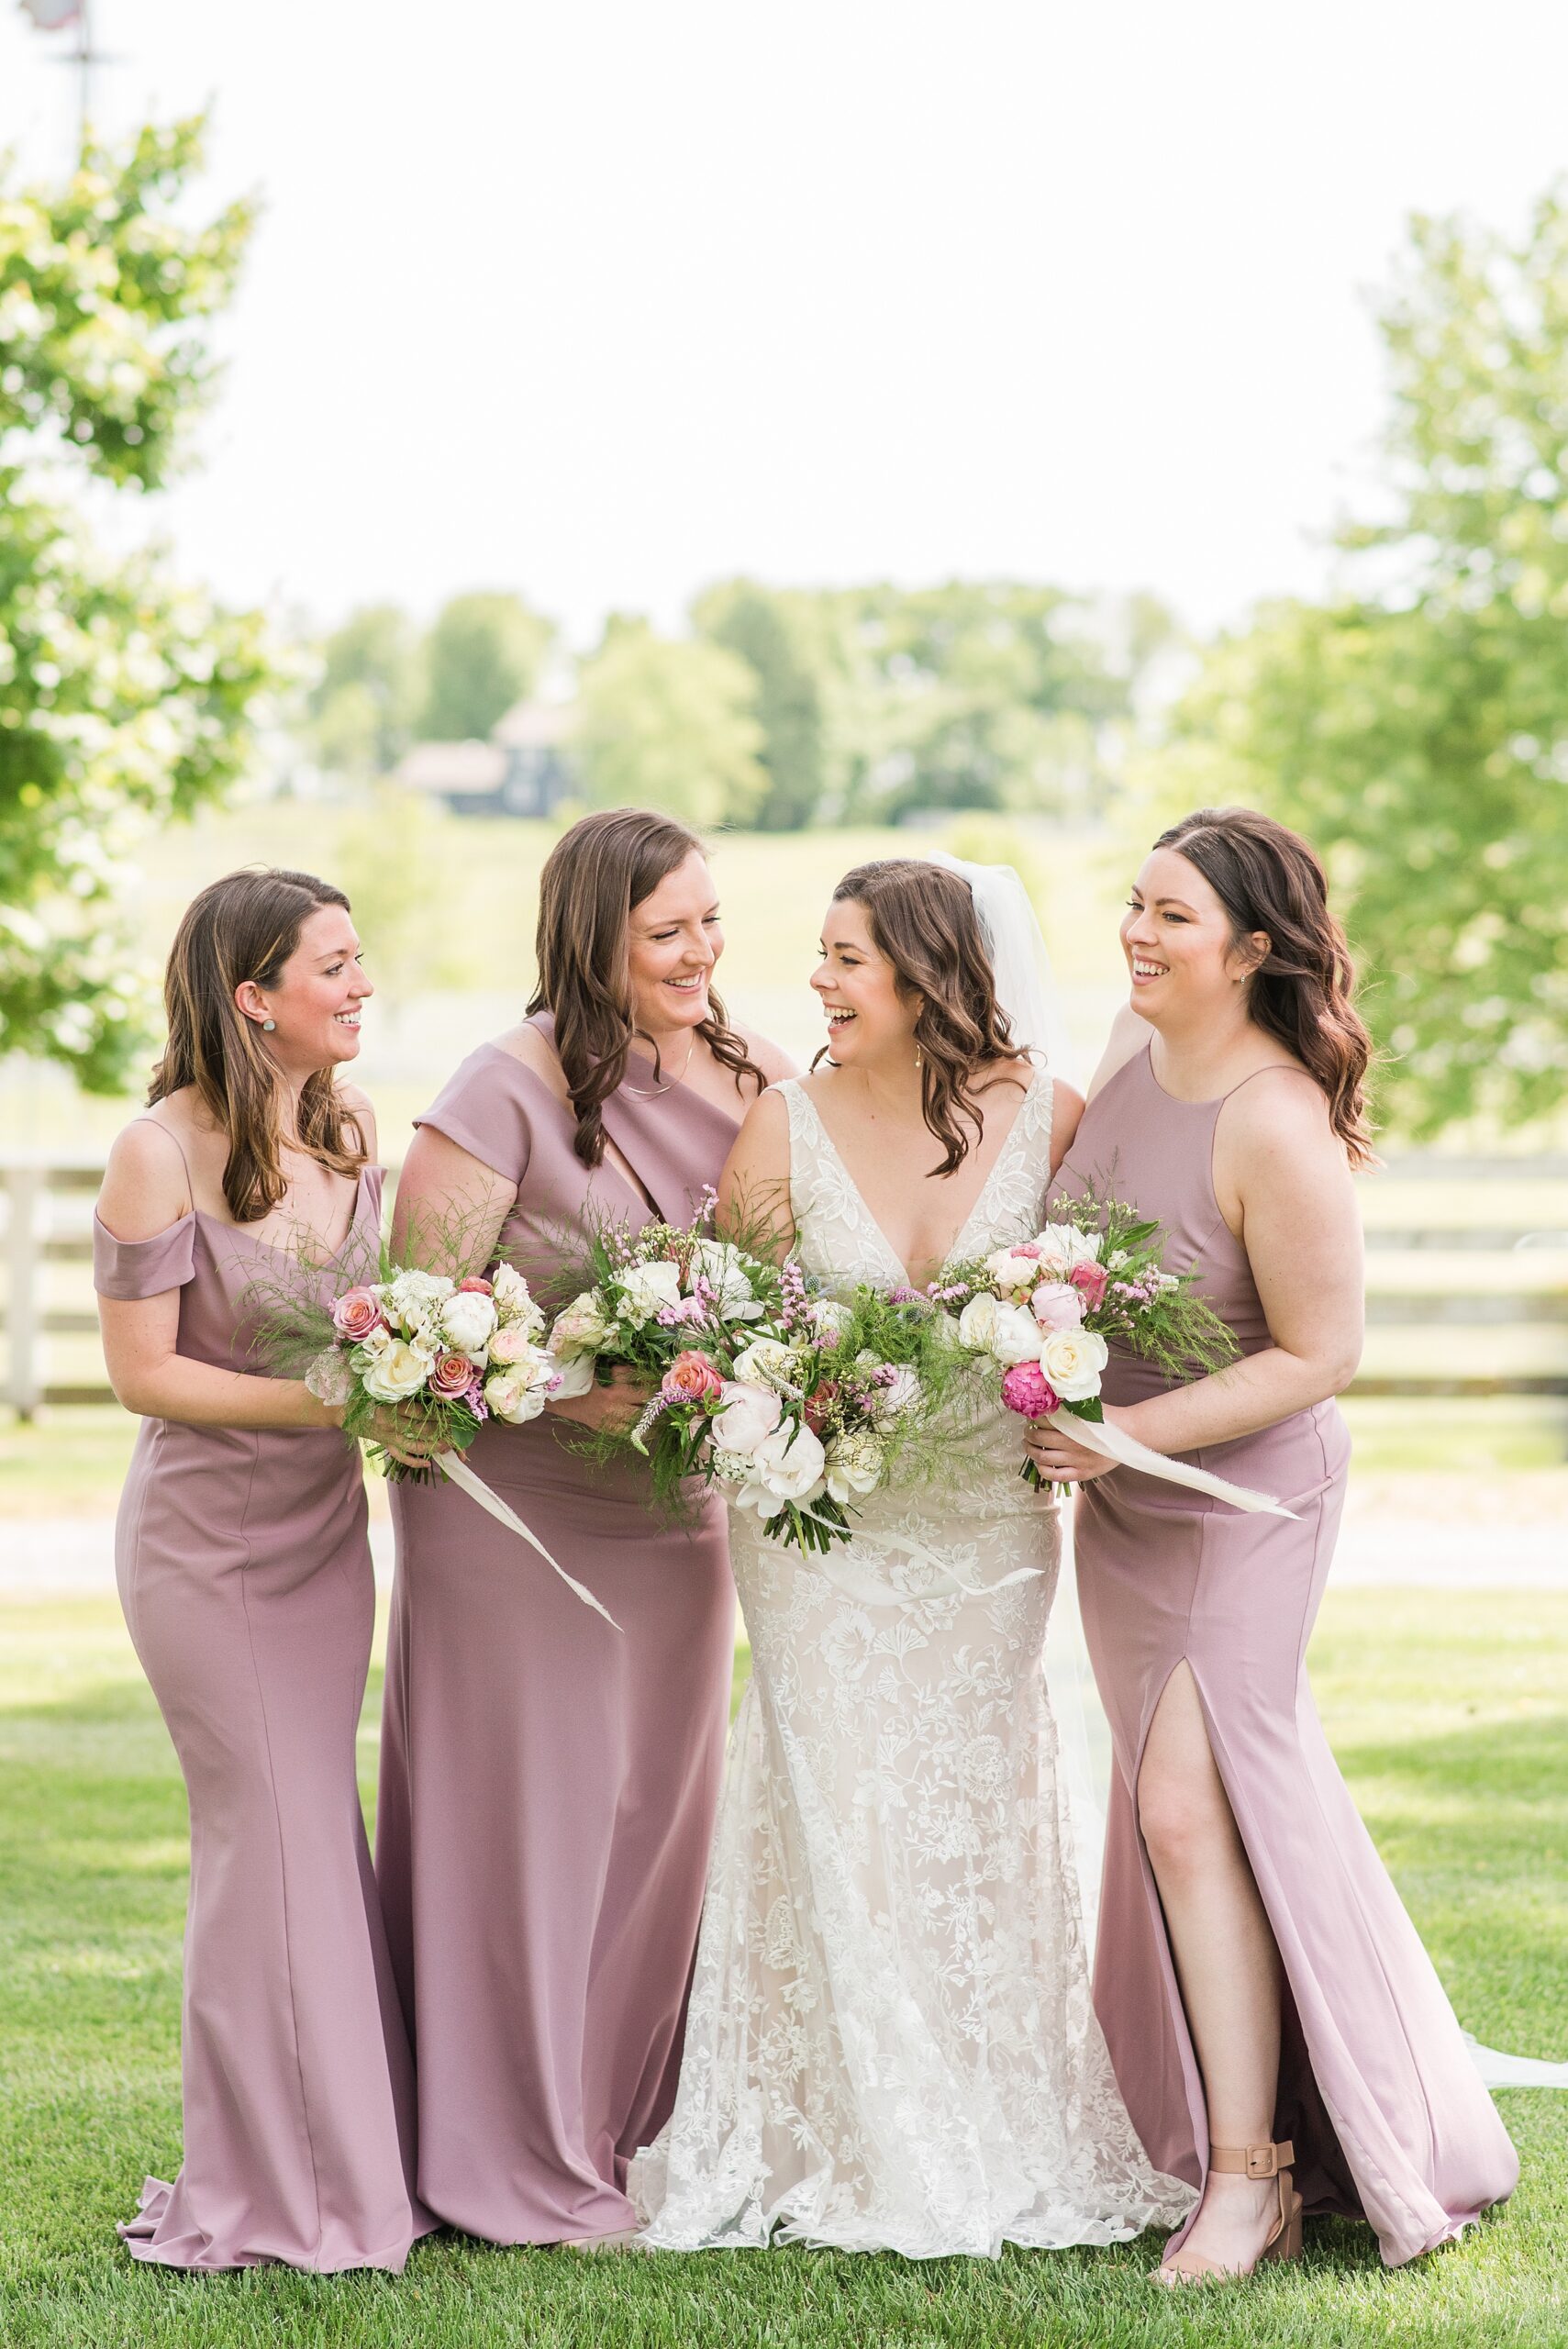 A bride laughs while standing in a lawn with her bridesmaids in pink dresses